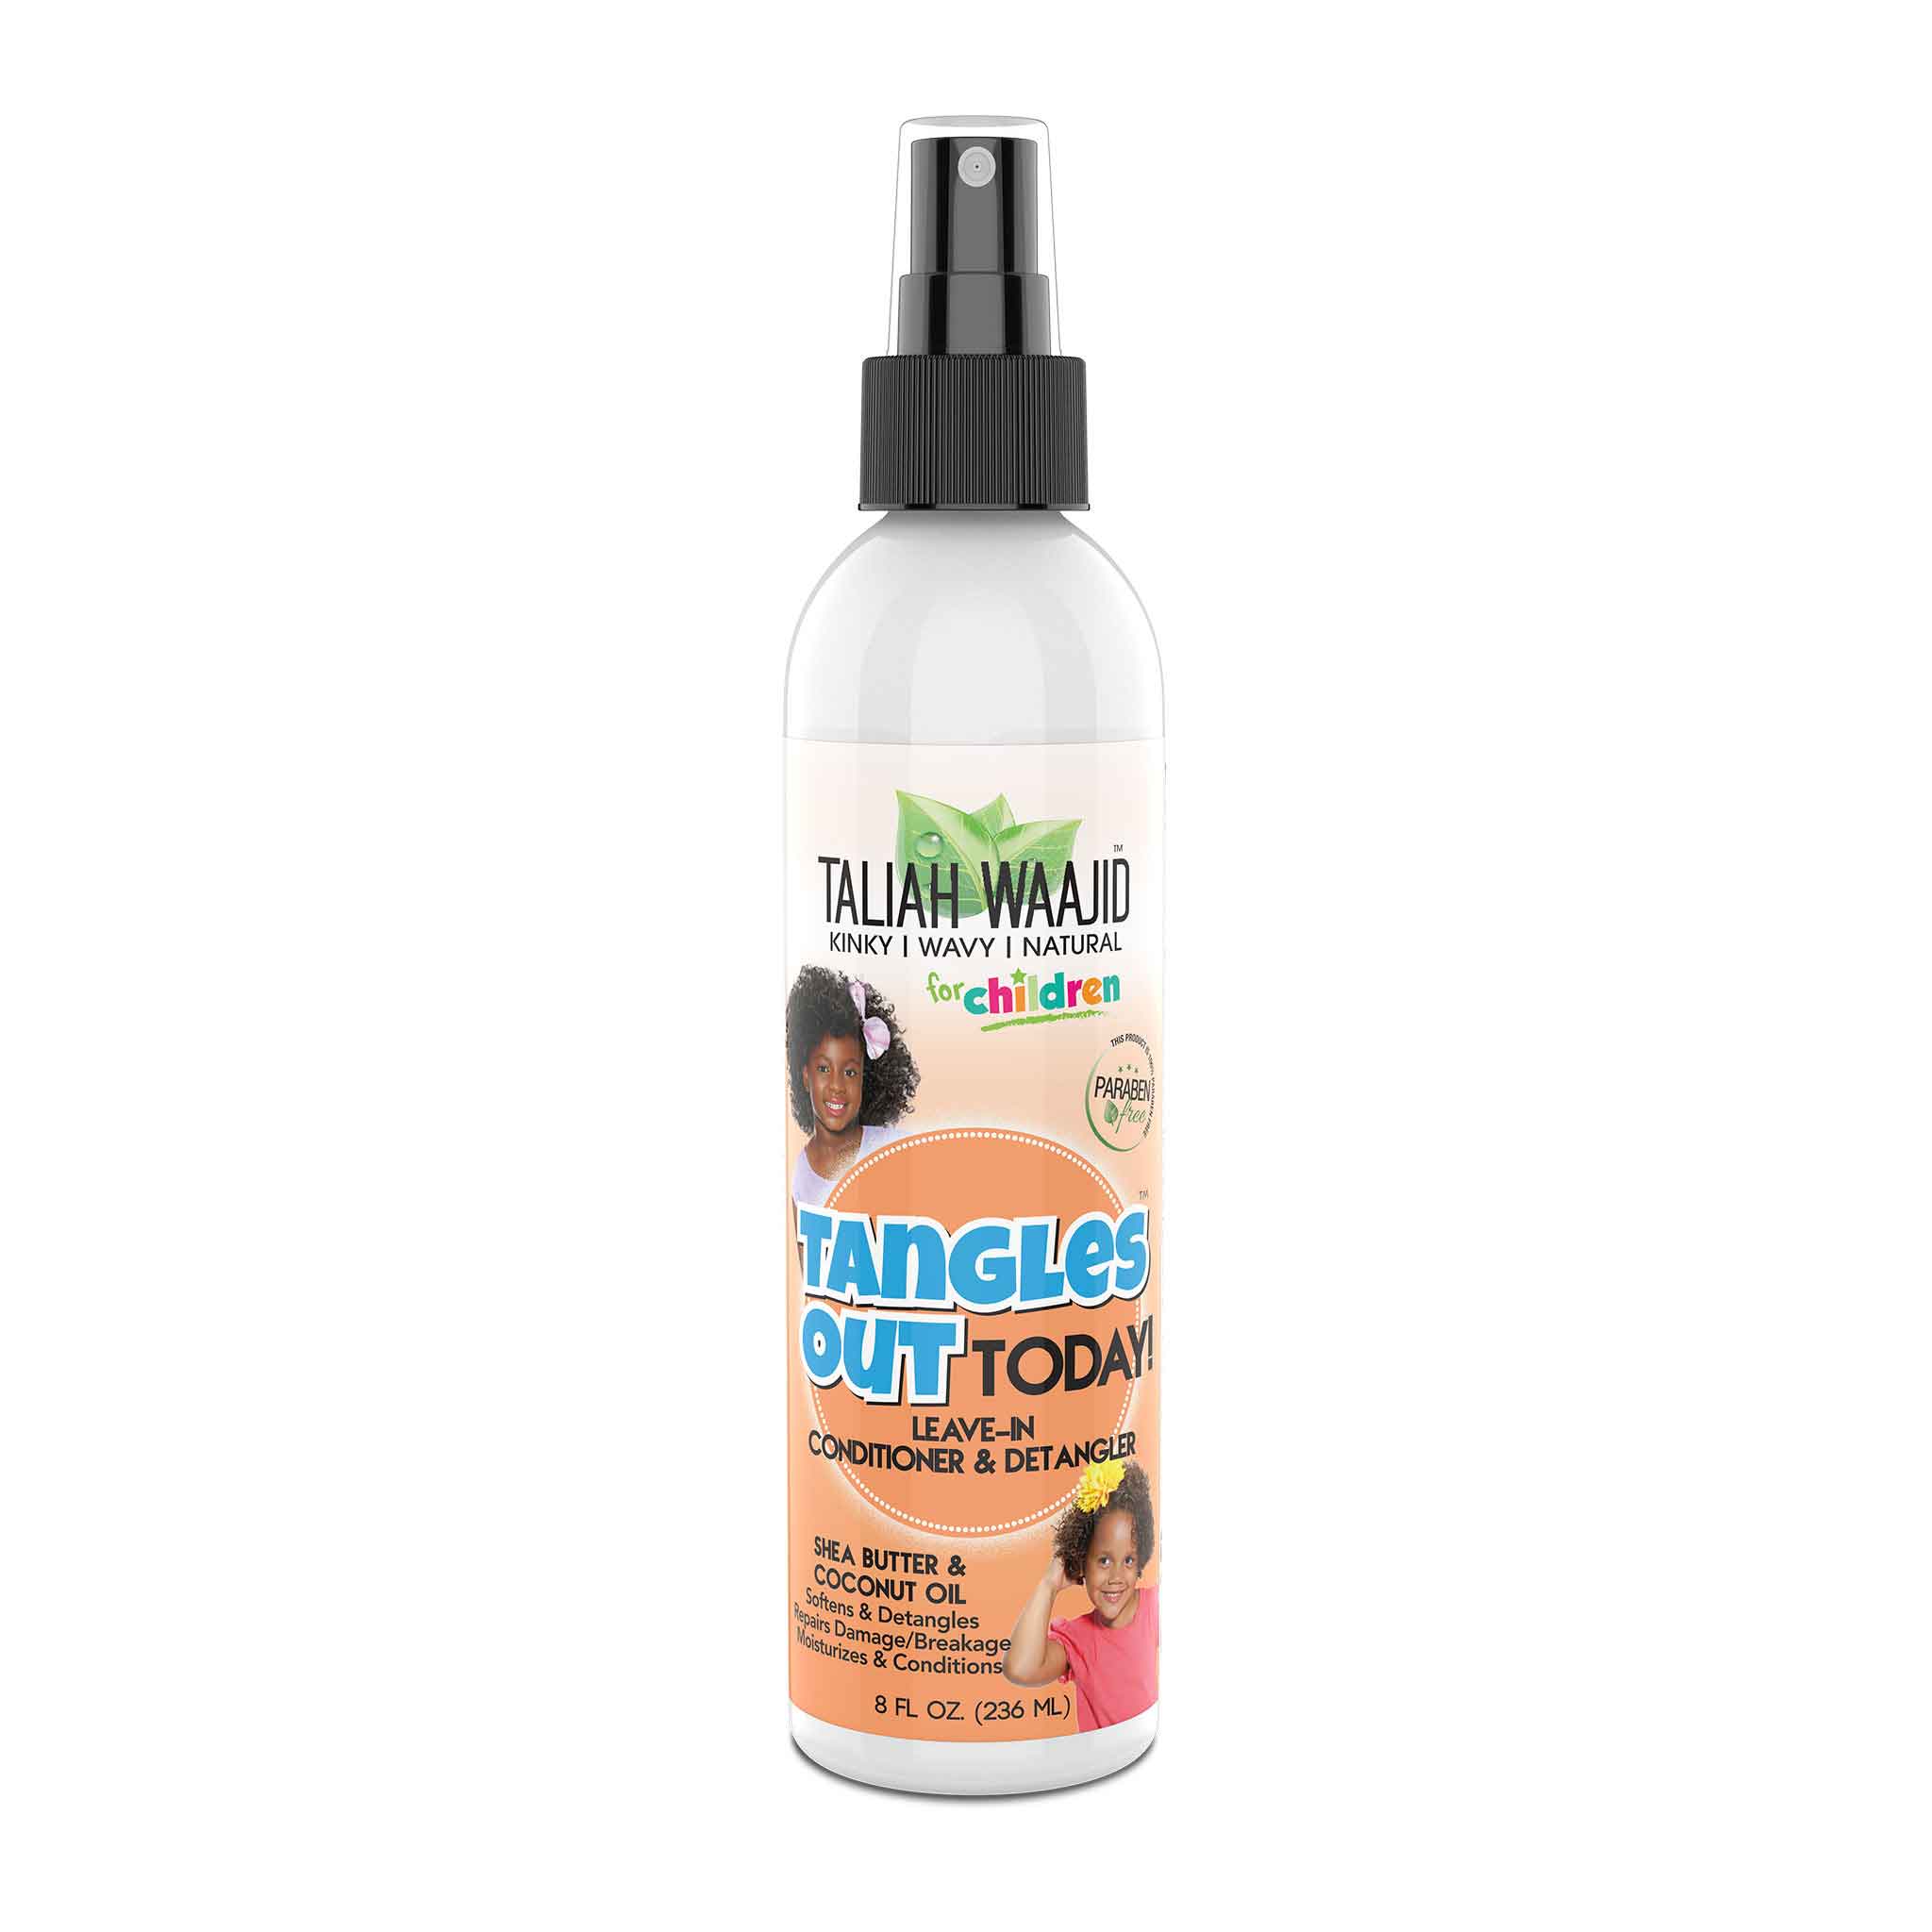 TALIAH WAAJID TANGLES OUT TODAY LEAVE-IN CONDITIONER 8oz-Taliah Waajid- Hive Beauty Supply